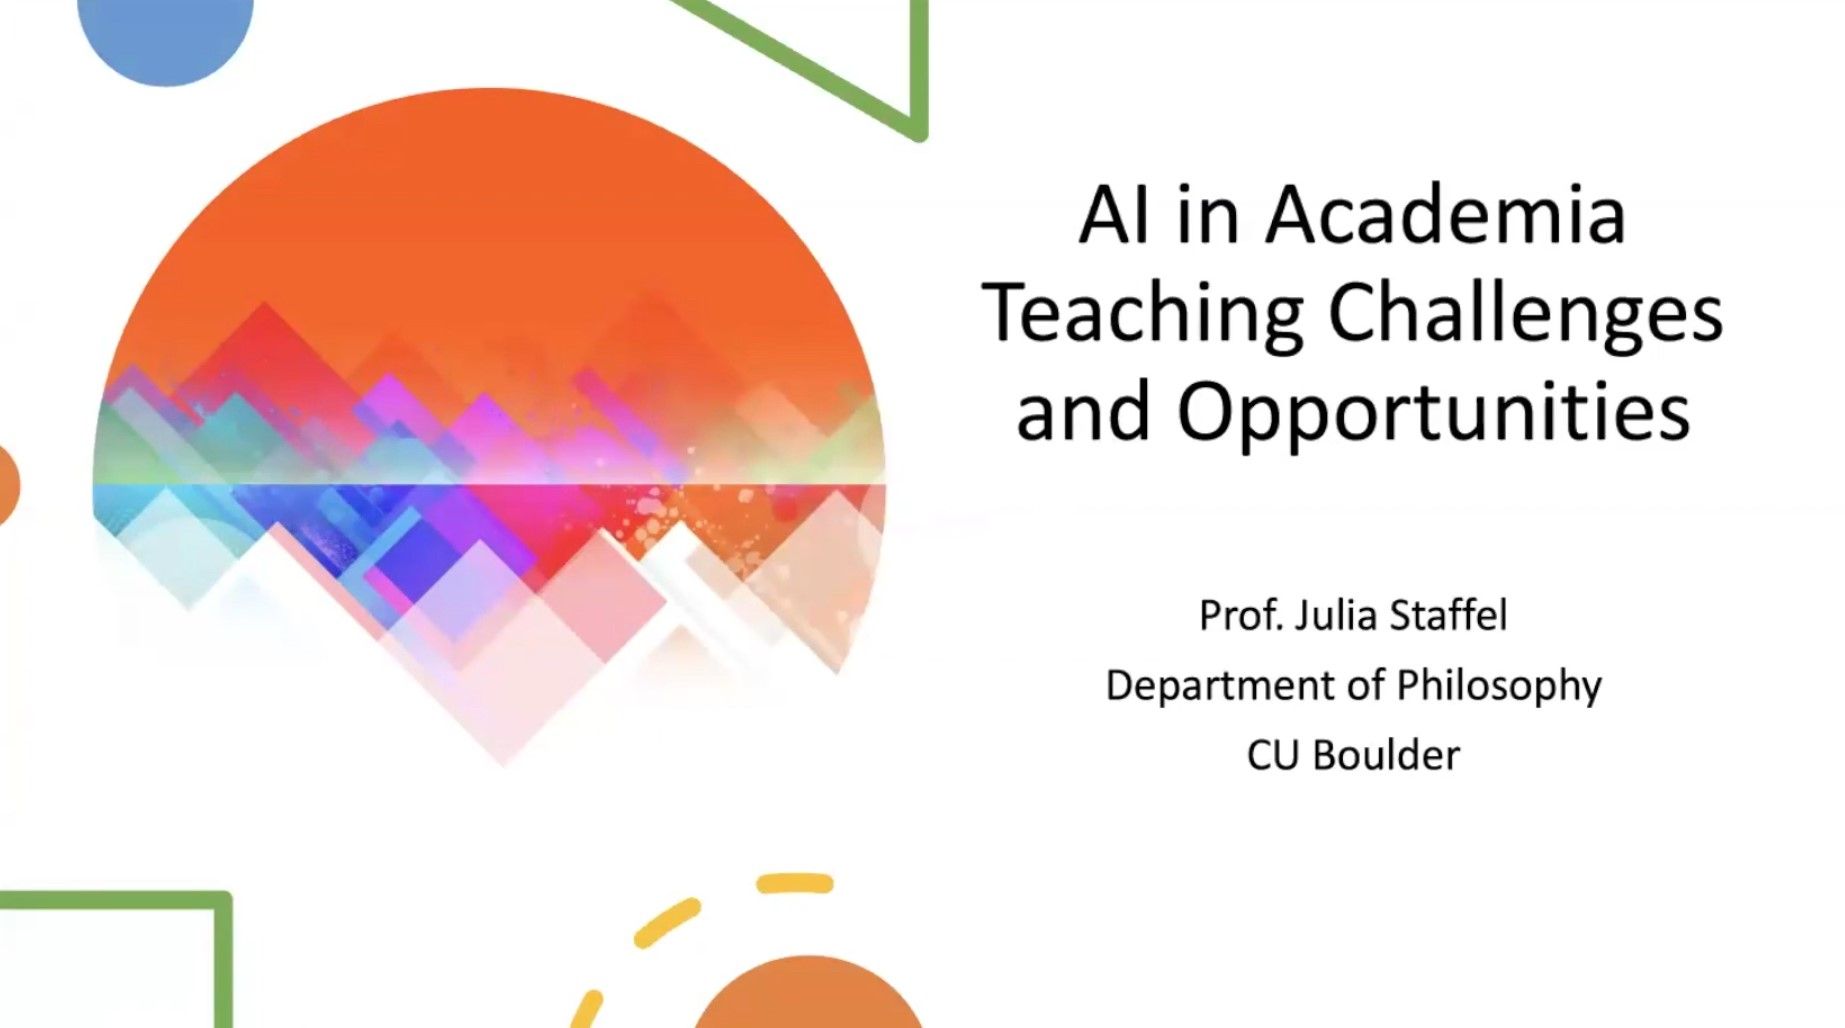 white background with orange half circle with other colorful colors breaching in. Text that reads "AI in Academia Teaching Opportunities Prof Julia Staffel Department of Philosophy CU Boulder"